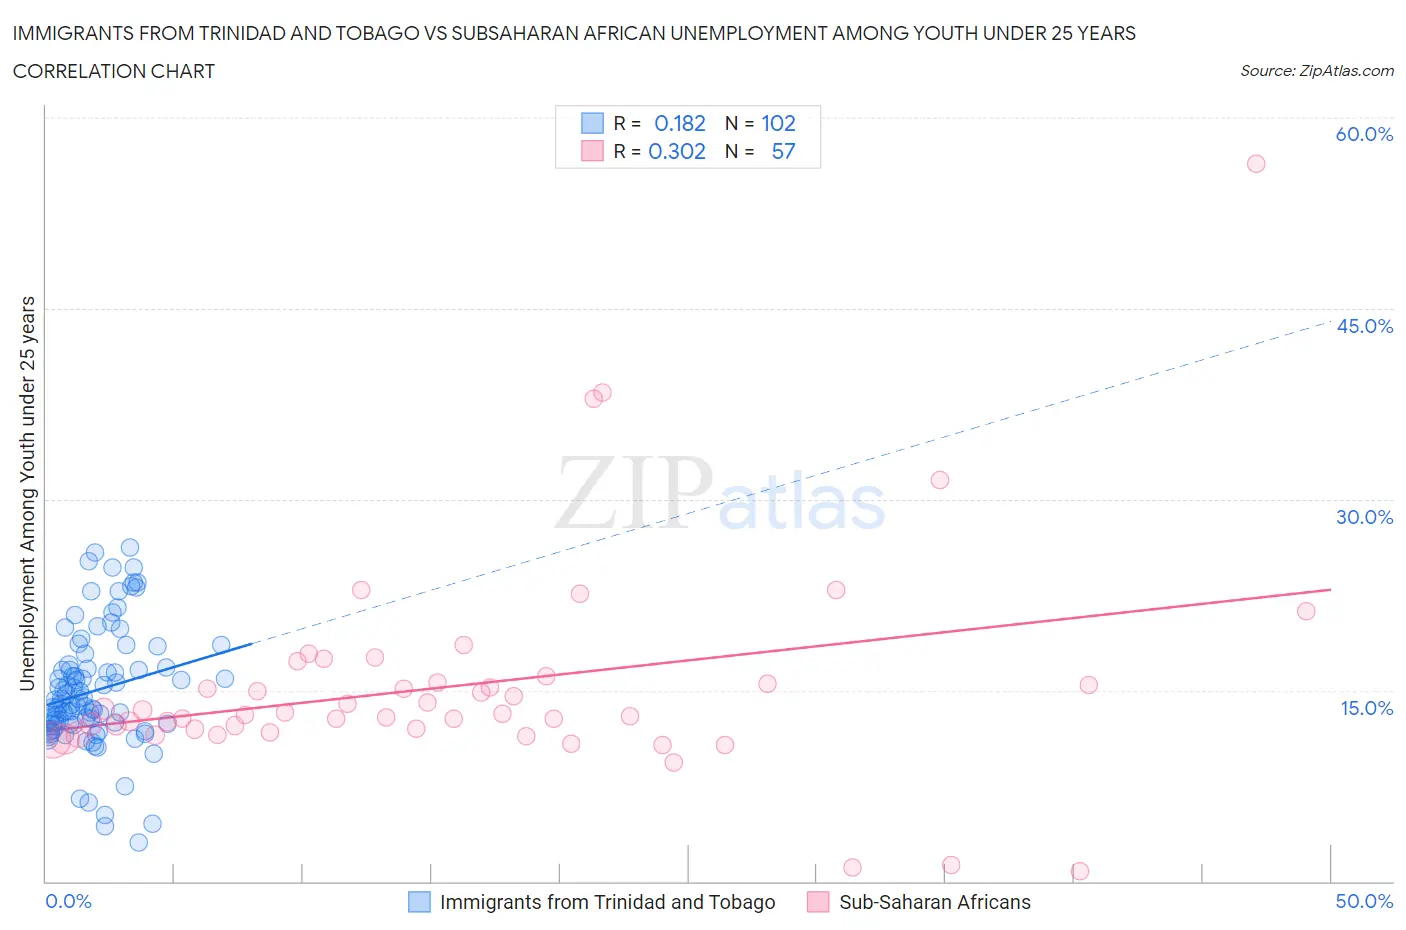 Immigrants from Trinidad and Tobago vs Subsaharan African Unemployment Among Youth under 25 years